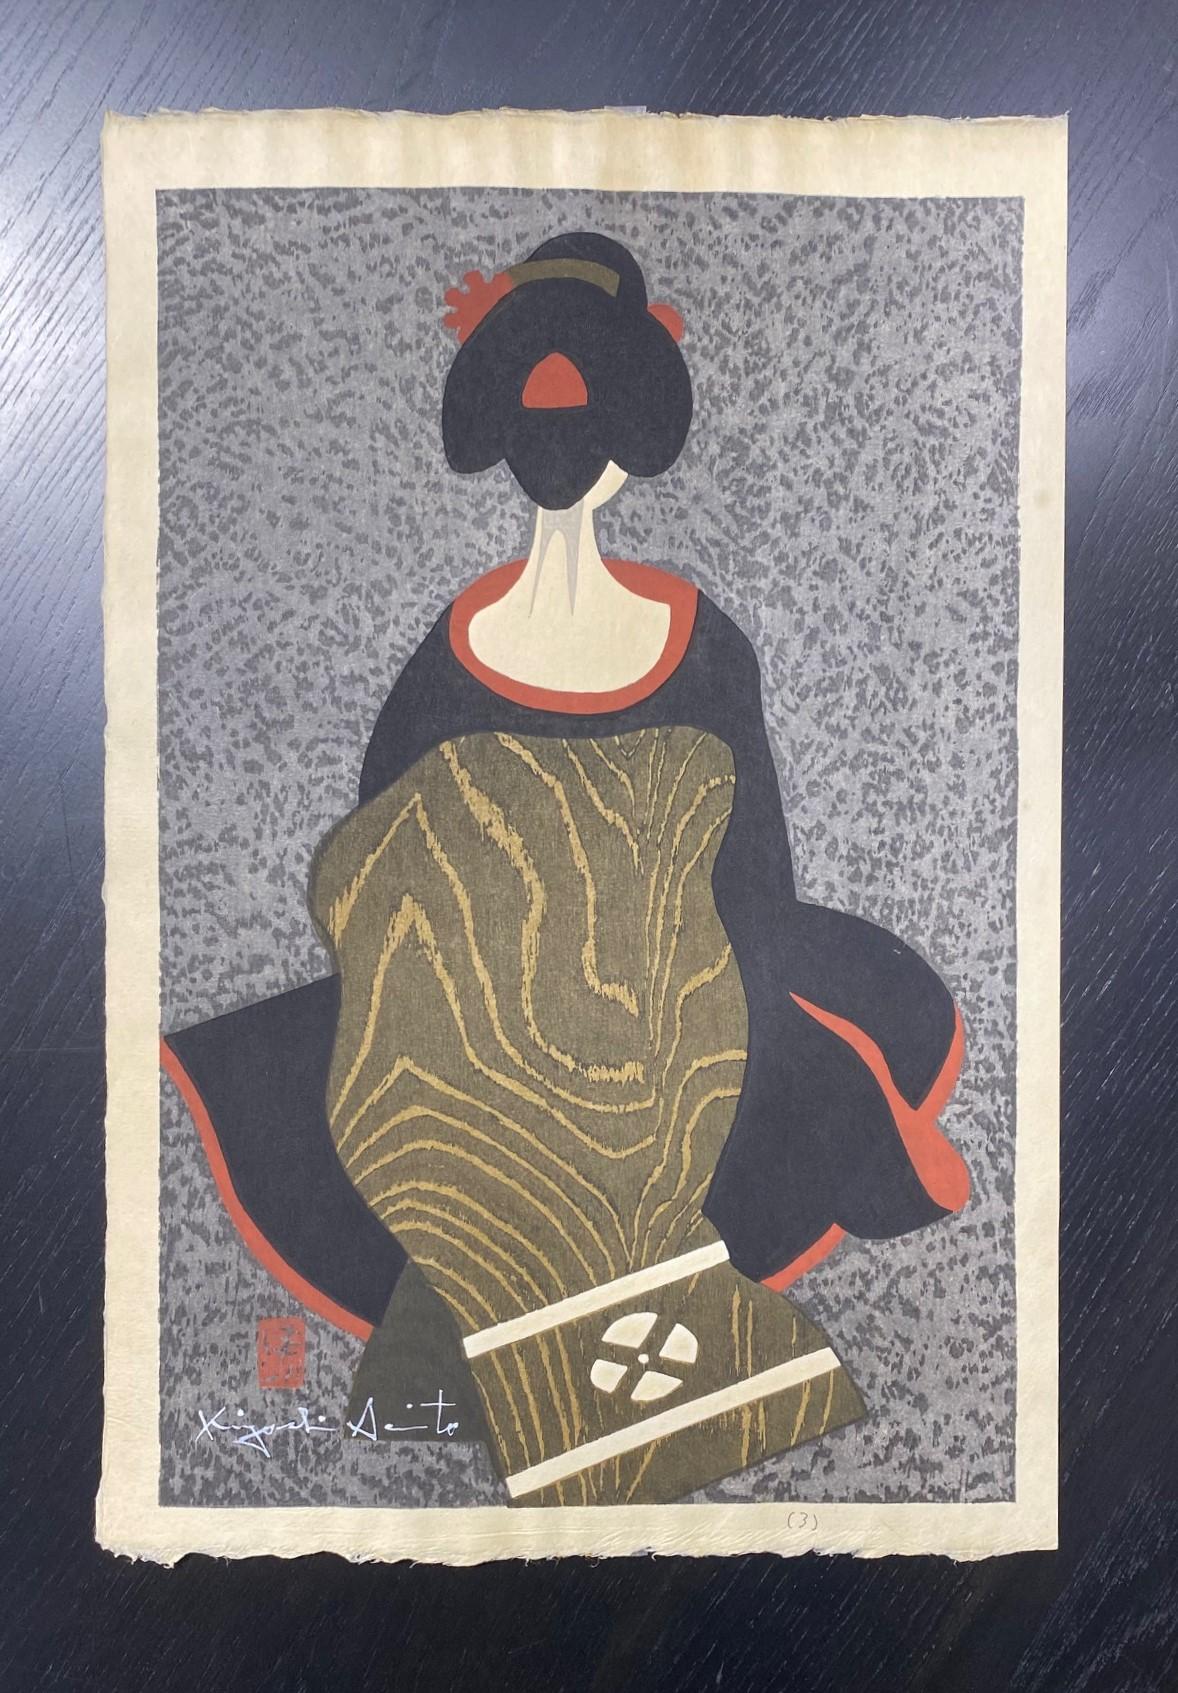 A beautifully and serenely composed woodblock print by famed Japanese printmaker Kiyoshi Saito. Many consider Saito to be one of the most important, if not the most important, contemporary Japanese printmakers of the 20th century. This print, titled